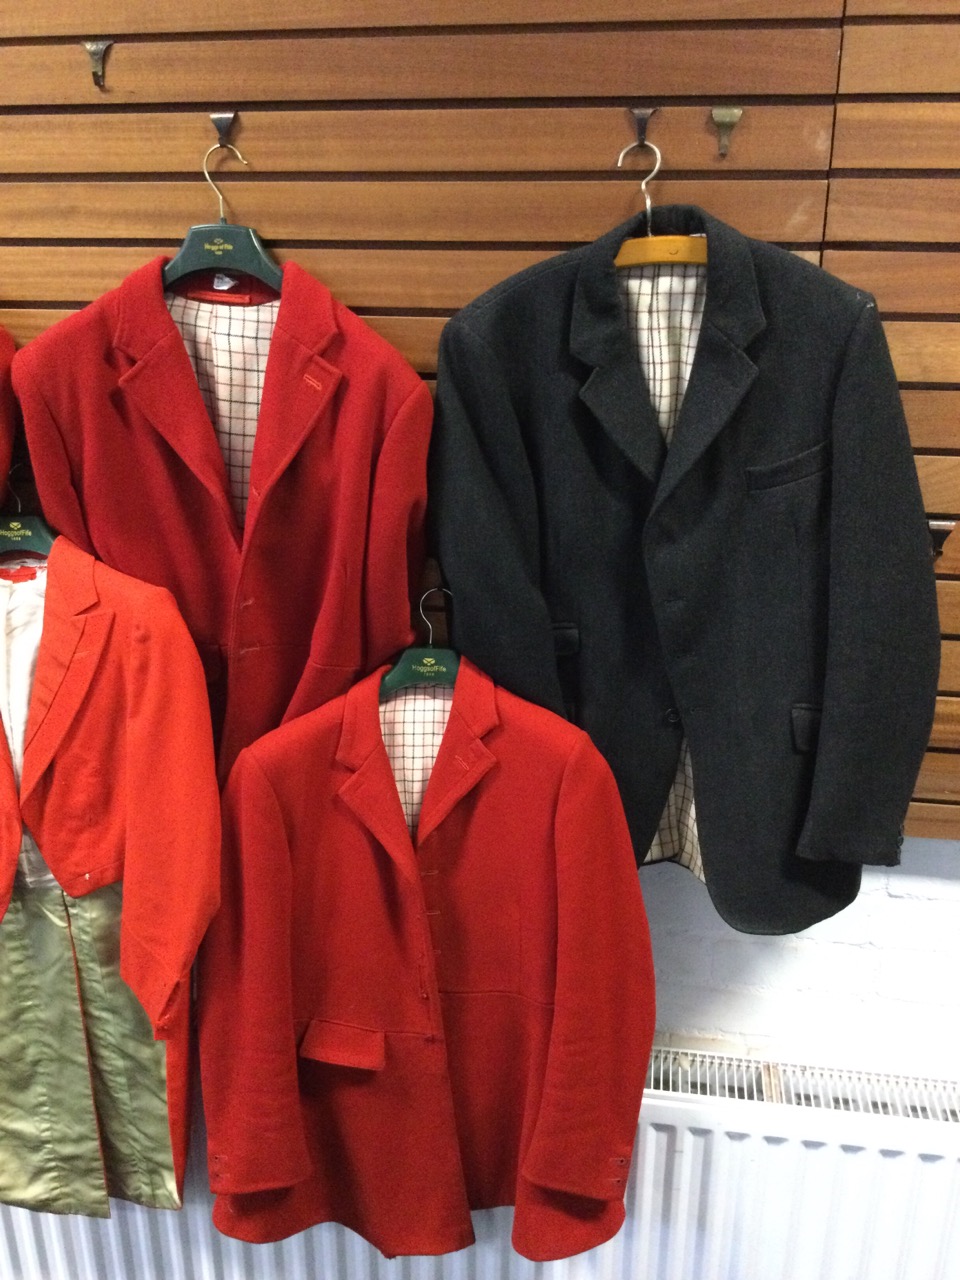 Three huntsmans scarlet hunting jackets with tartan linings; a huntsmans dress tail coat; and a - Image 2 of 3